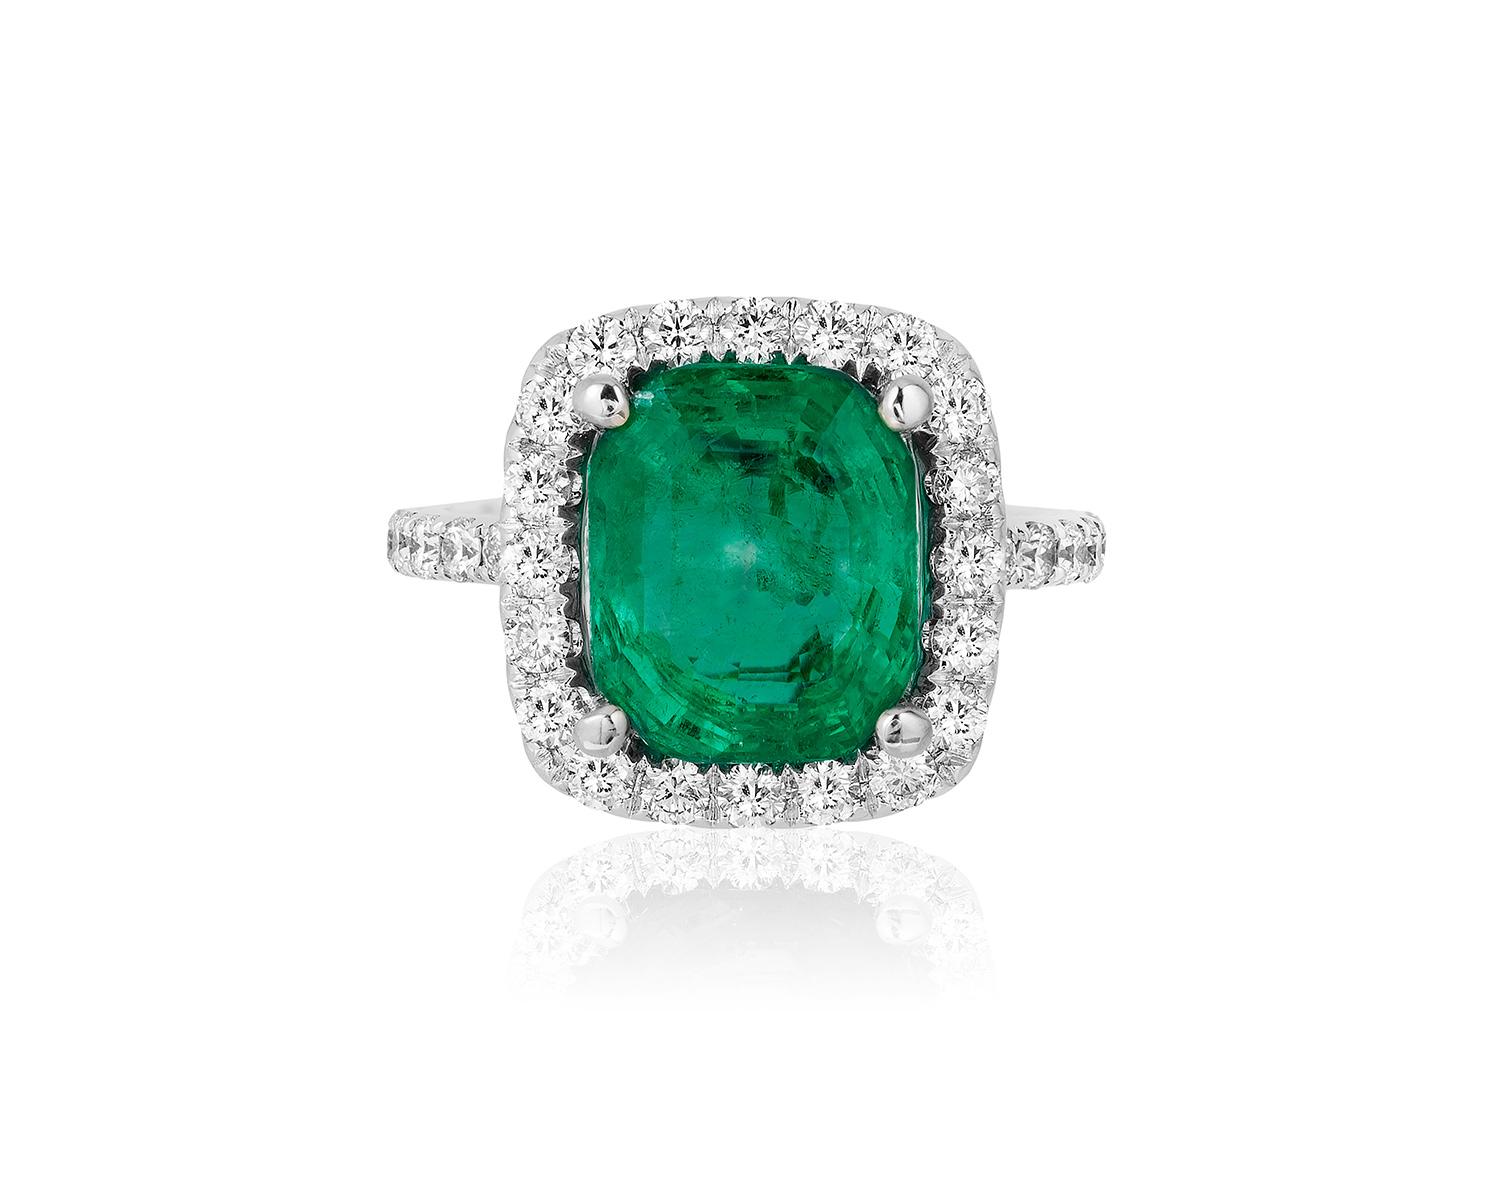 Andreoli 4.07 Carat Colombian Emerald CDC Certified Diamond Engagement Ring 18k White Gold

This ring features:

1.40 Carat Round Brilliant Diamonds (F-G-H Color, VS-SI Clarity_
4.07 Carat Colombian Emerald Certified by CDC Switzerland Gemology